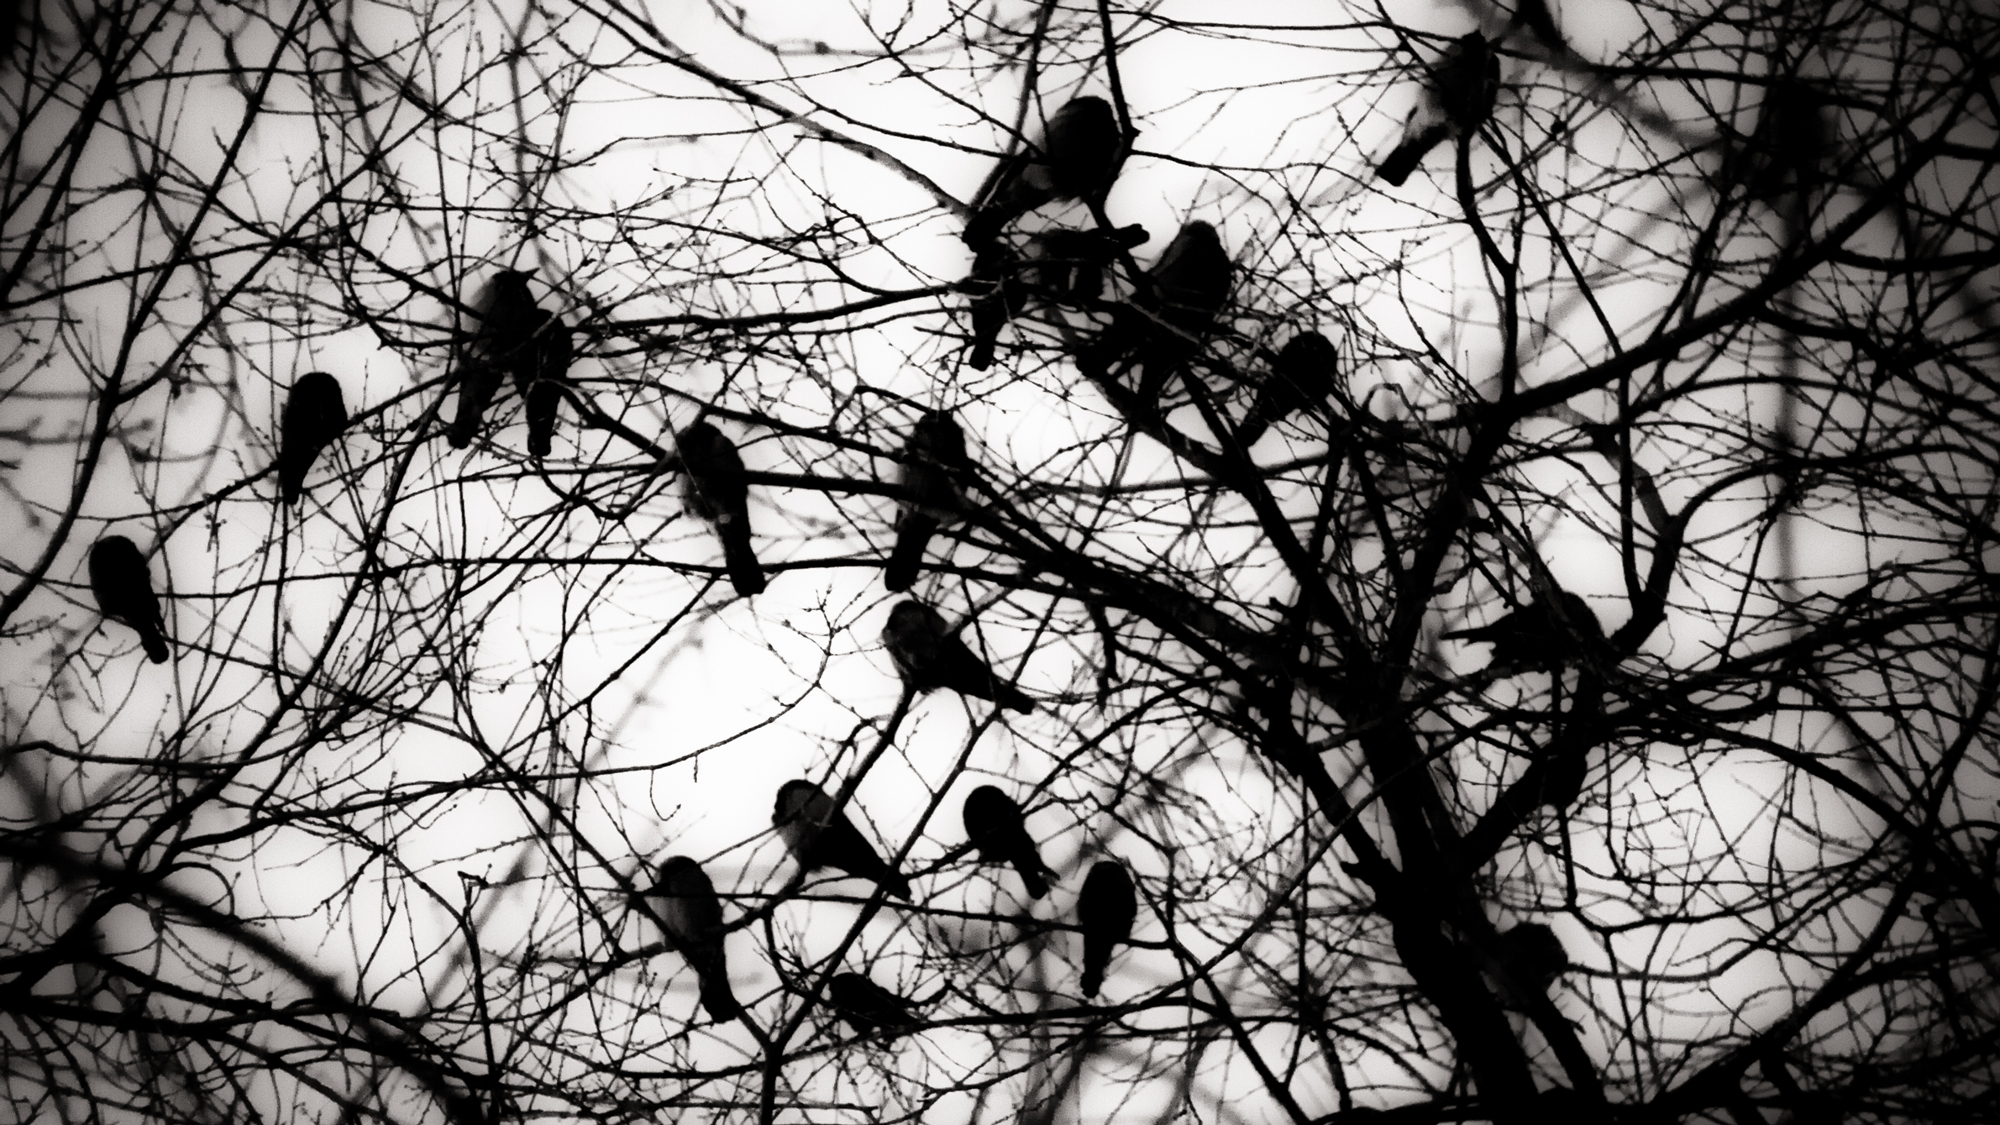 Crows. Photo © Mary Quite Contrary / Flickr through a Creative Commons license